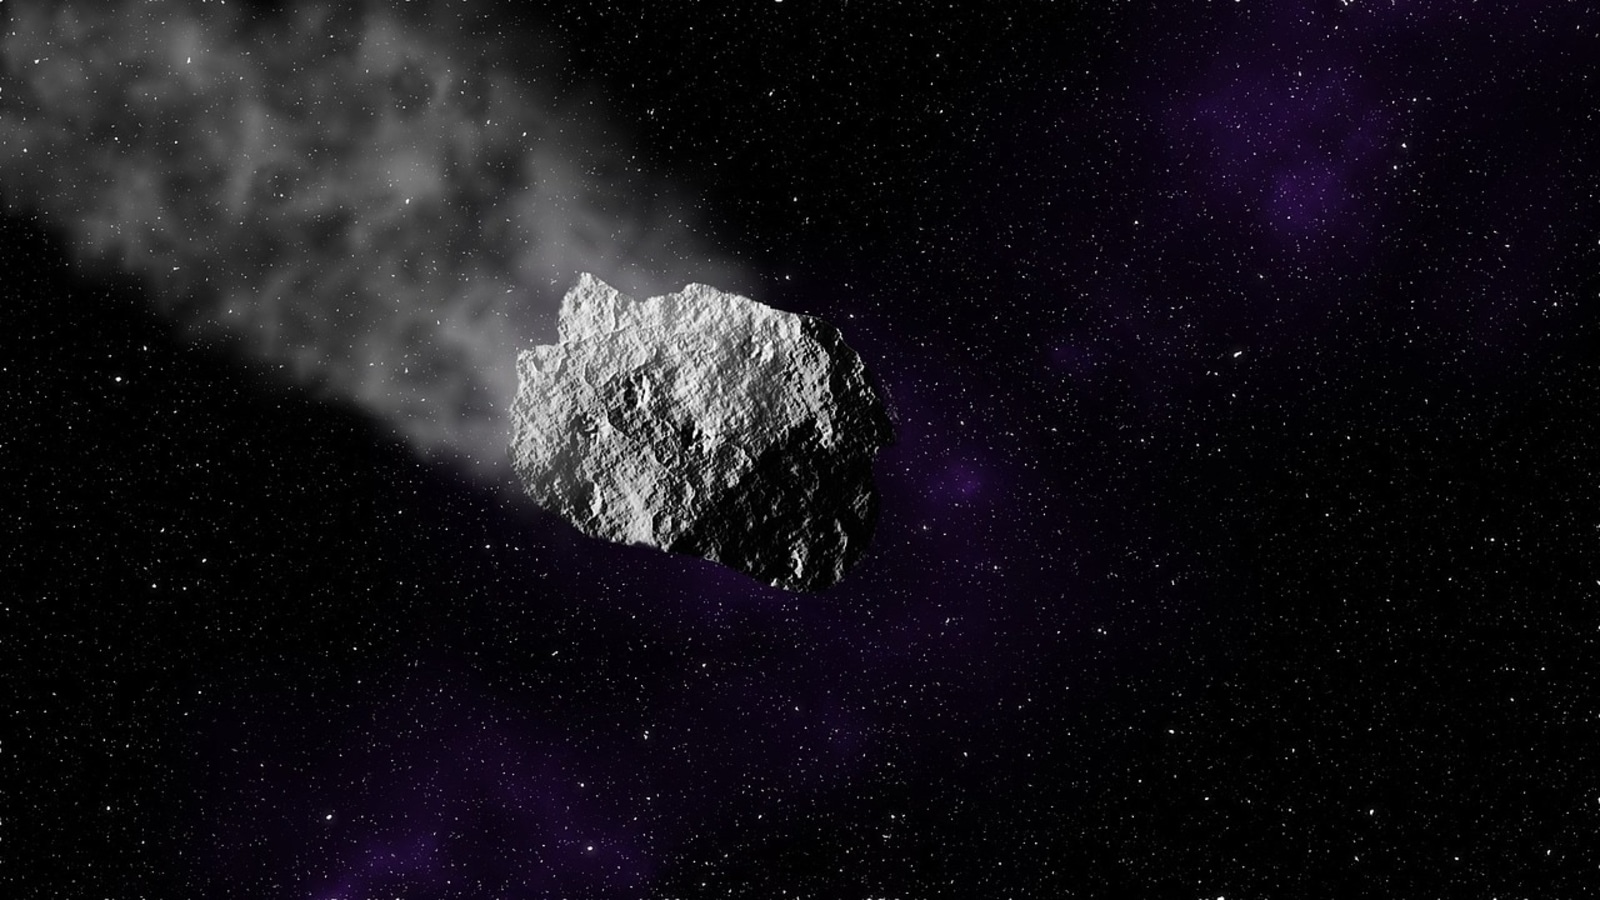 Shocking! NASA to Slow Hunt for Asteroids That Could Kill Millions in 'Baffling' US Move?